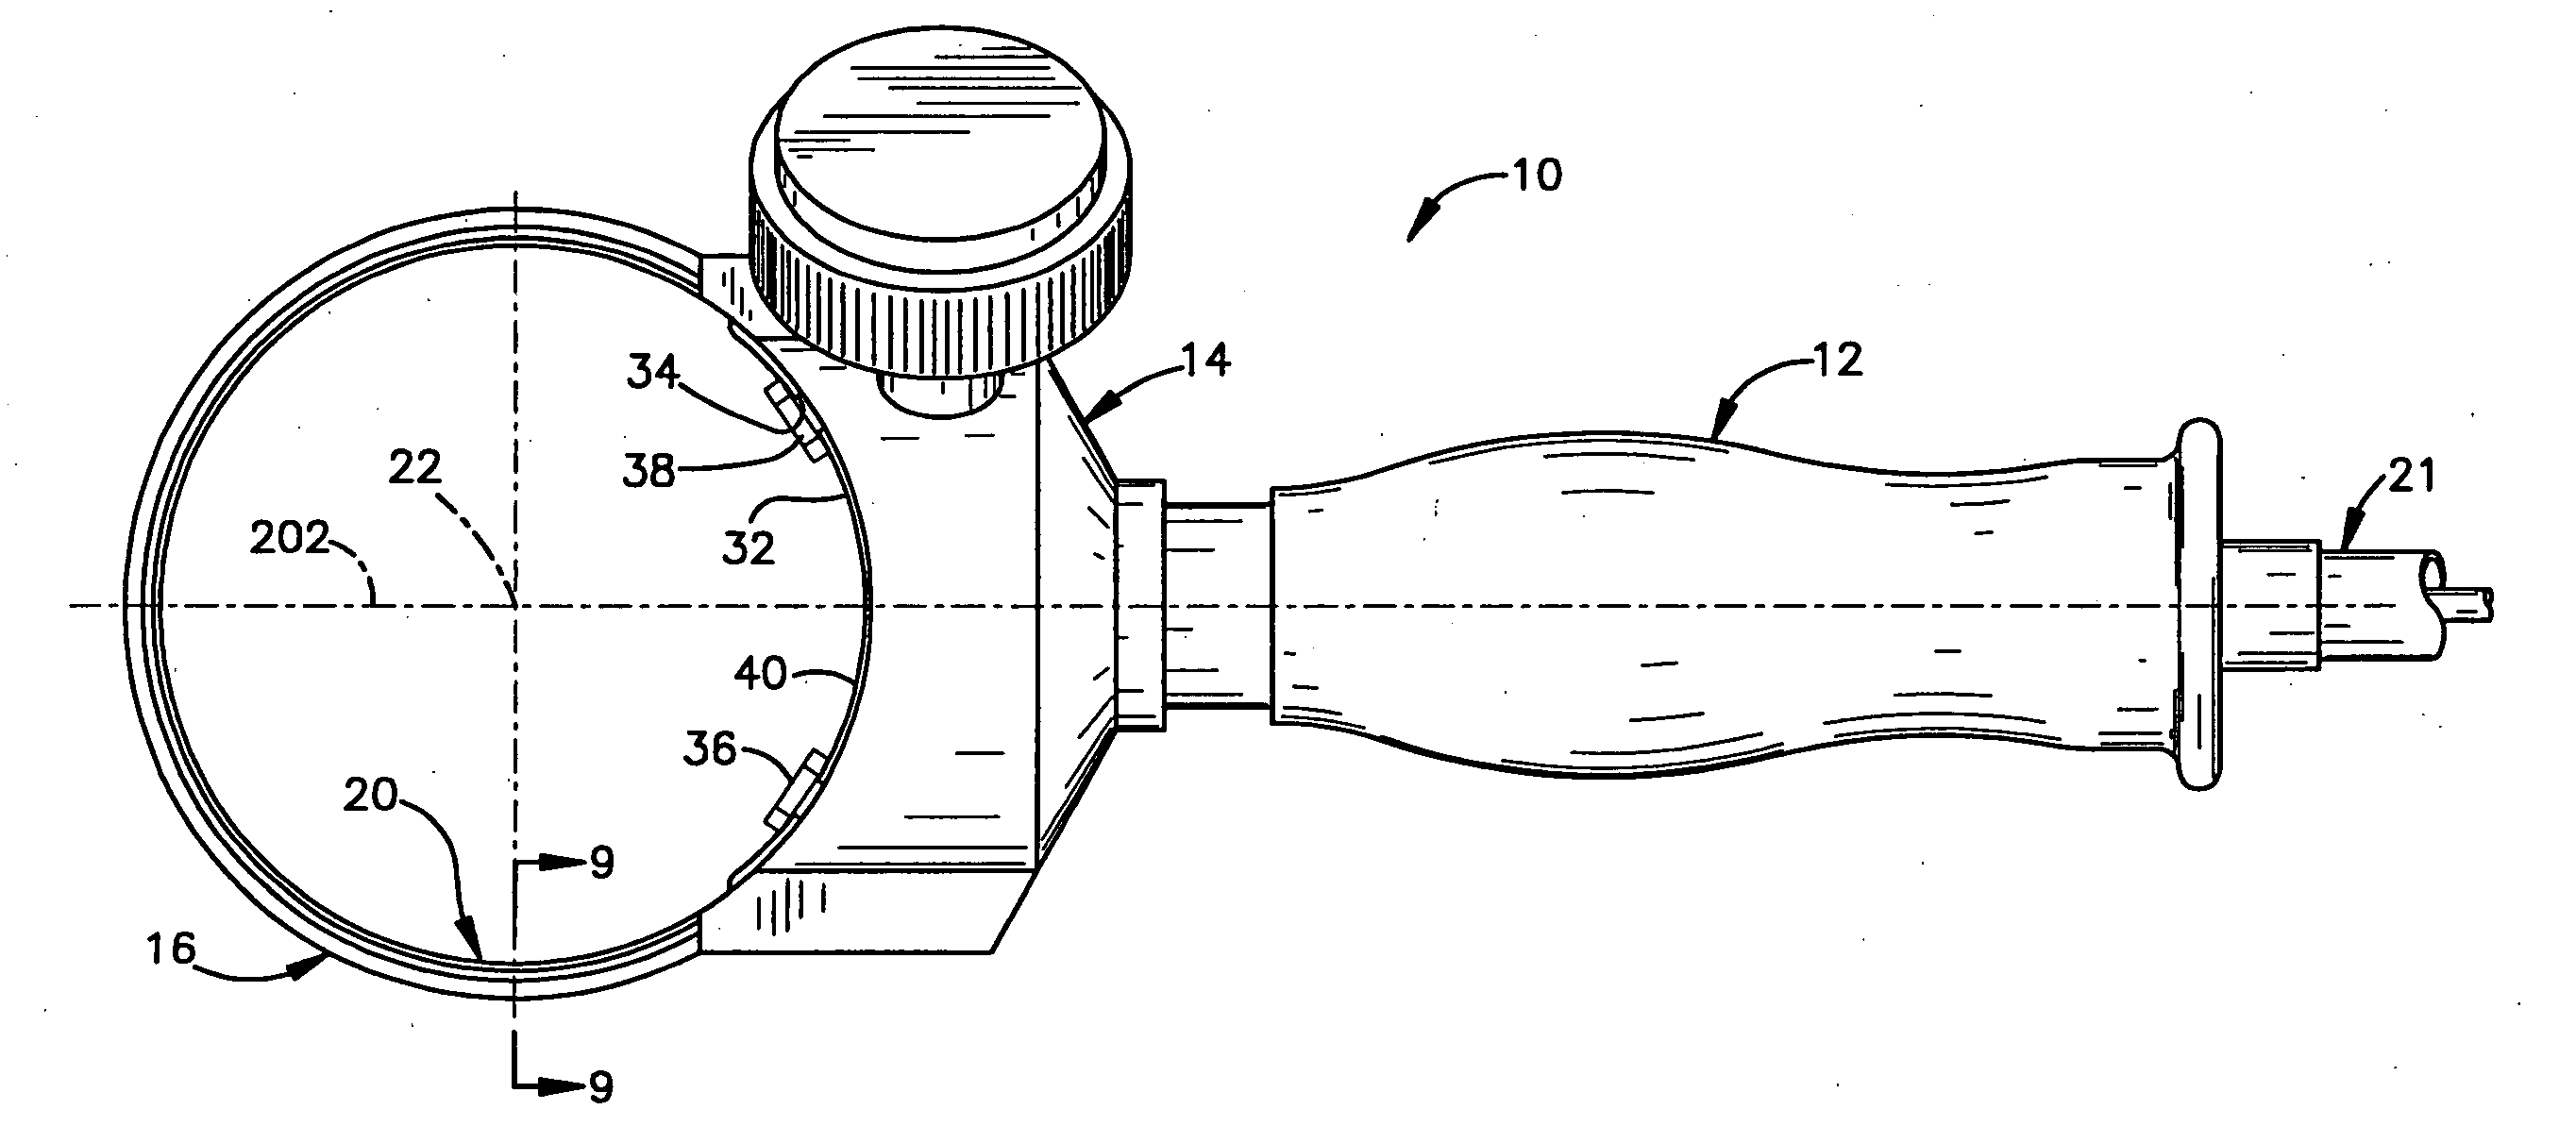 Low friction rotary knife